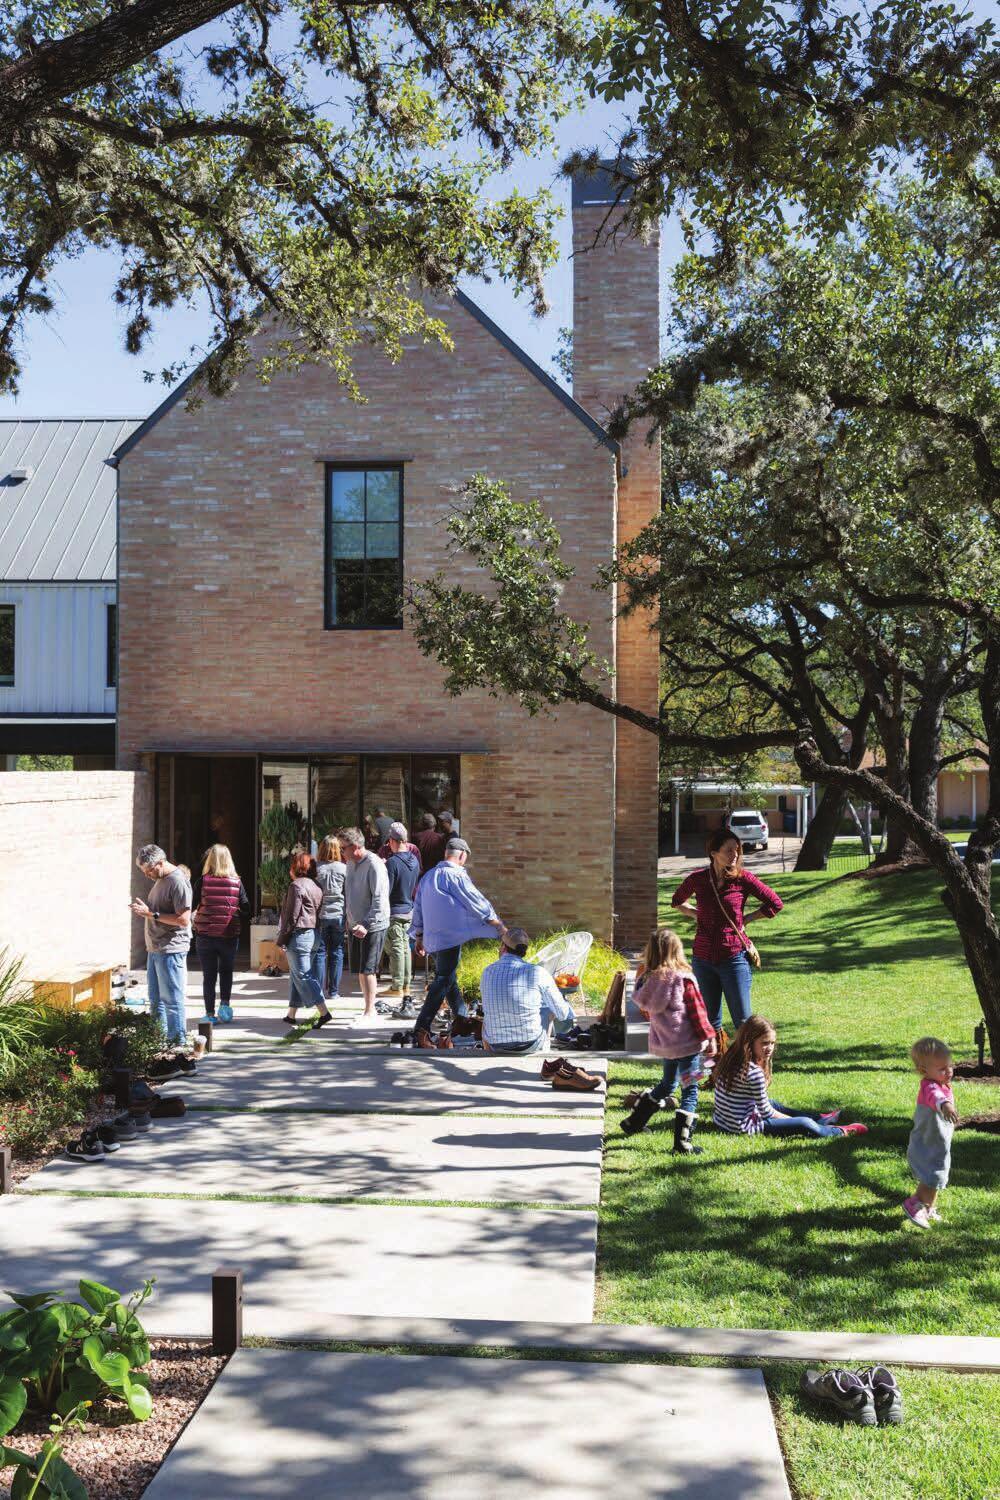 AIA Austin provides the Austin architecture community with resources and relationships to make a difference through design.